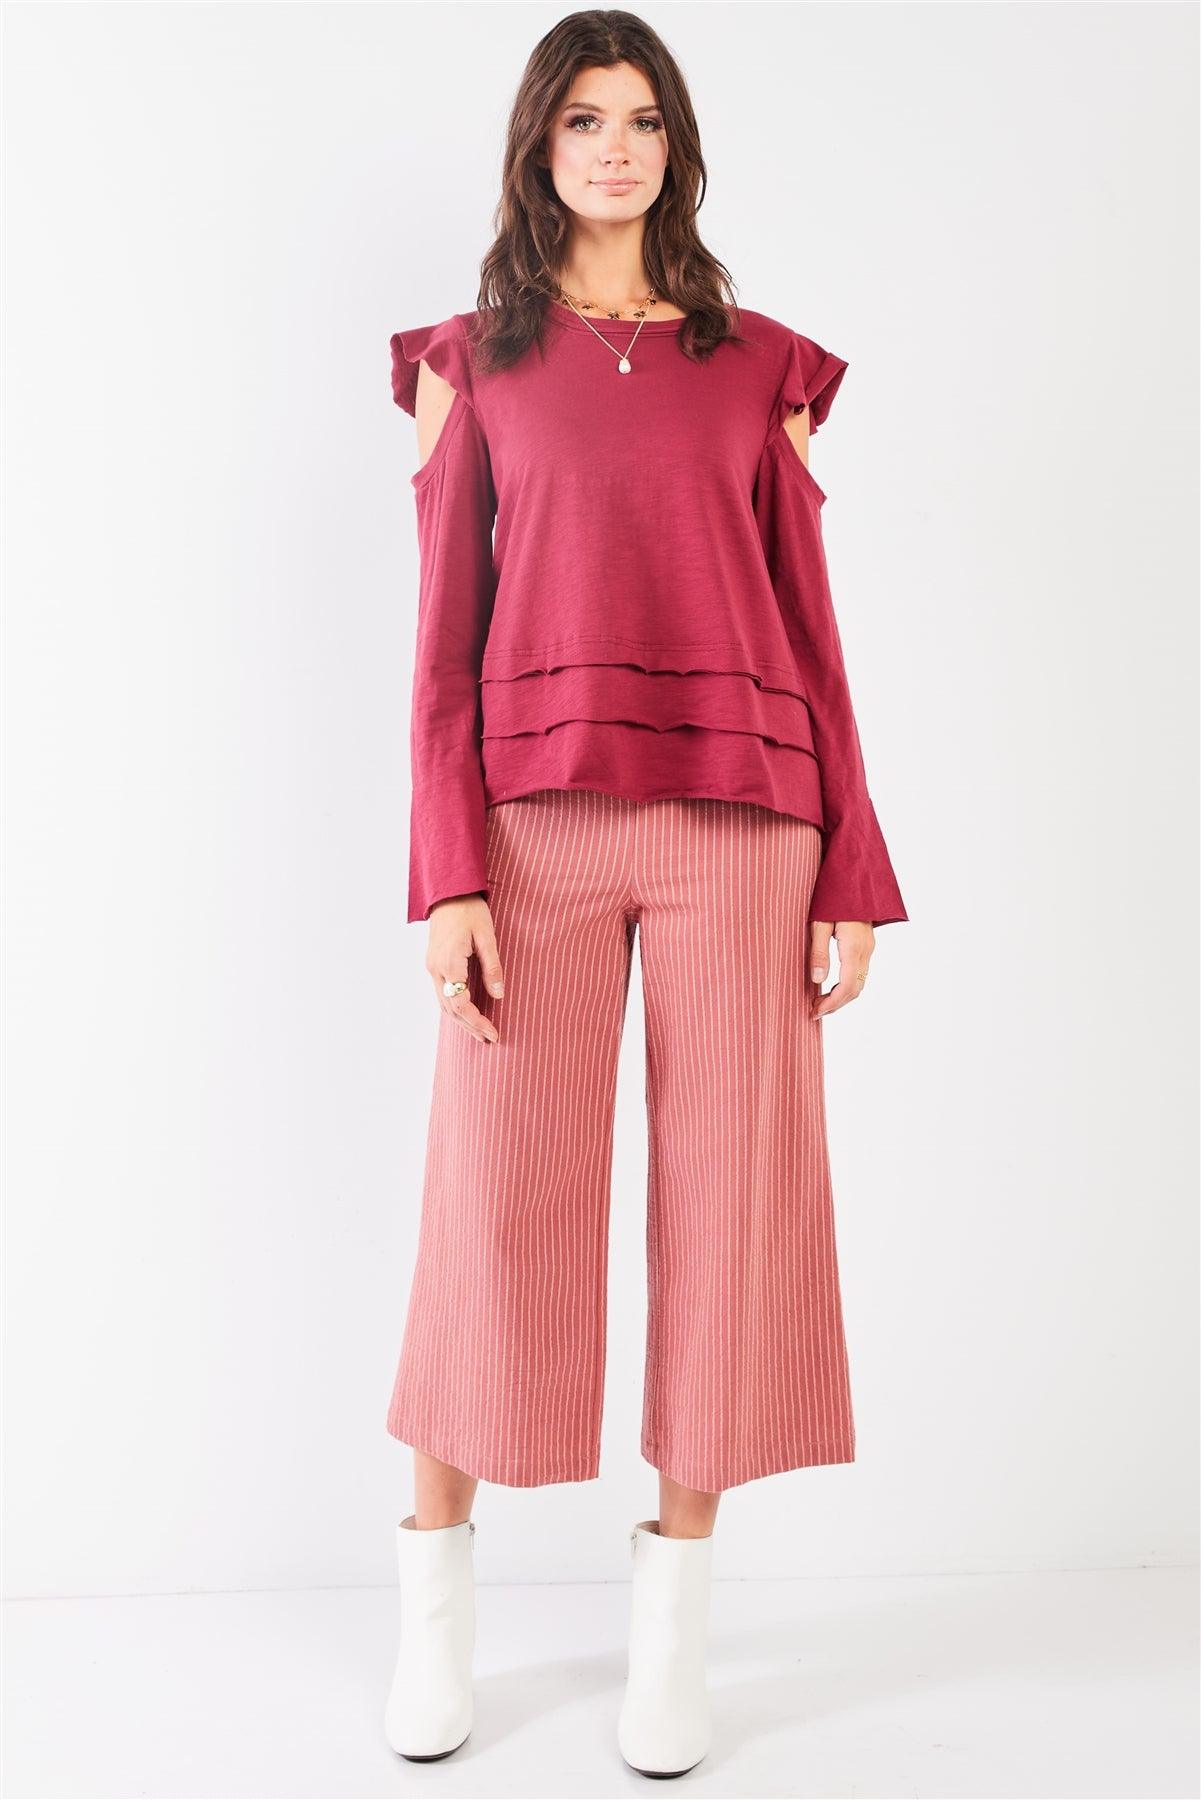 Wine Cut-Out Shoulder Bell Sleeve Raw Edge Detail Layered Hem Top /1-1-2